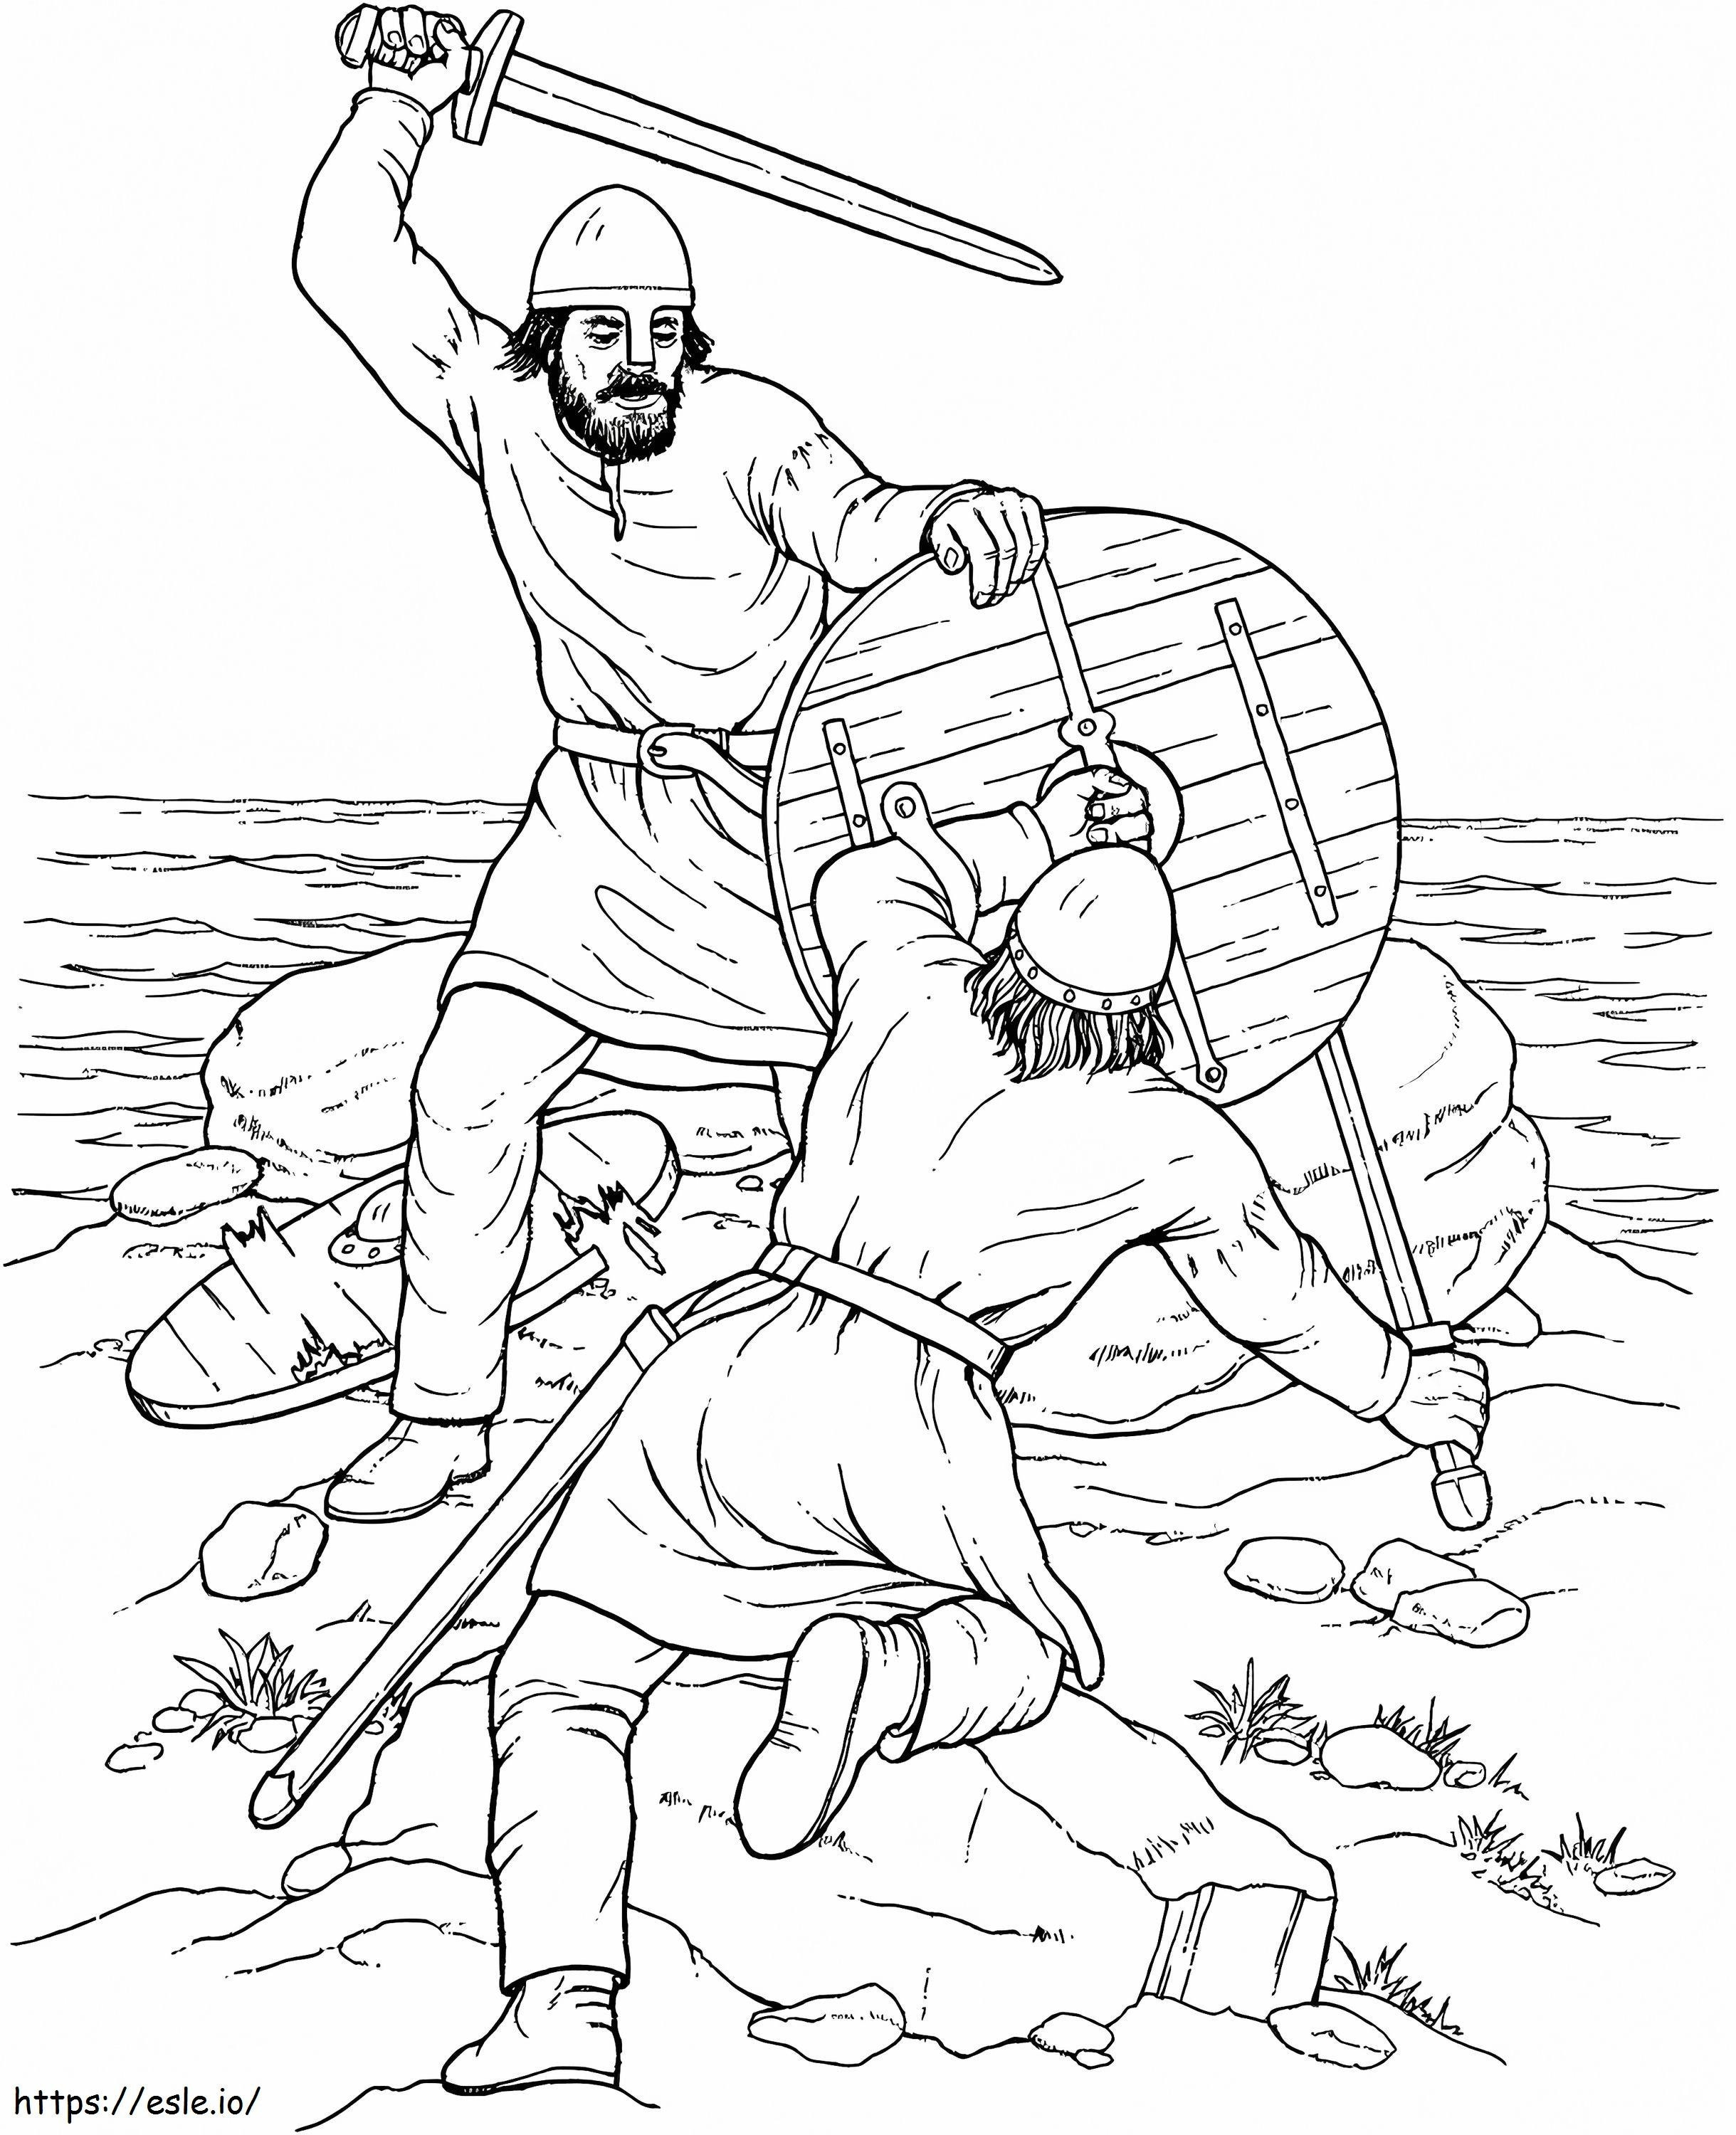 Fight Of Vikings coloring page